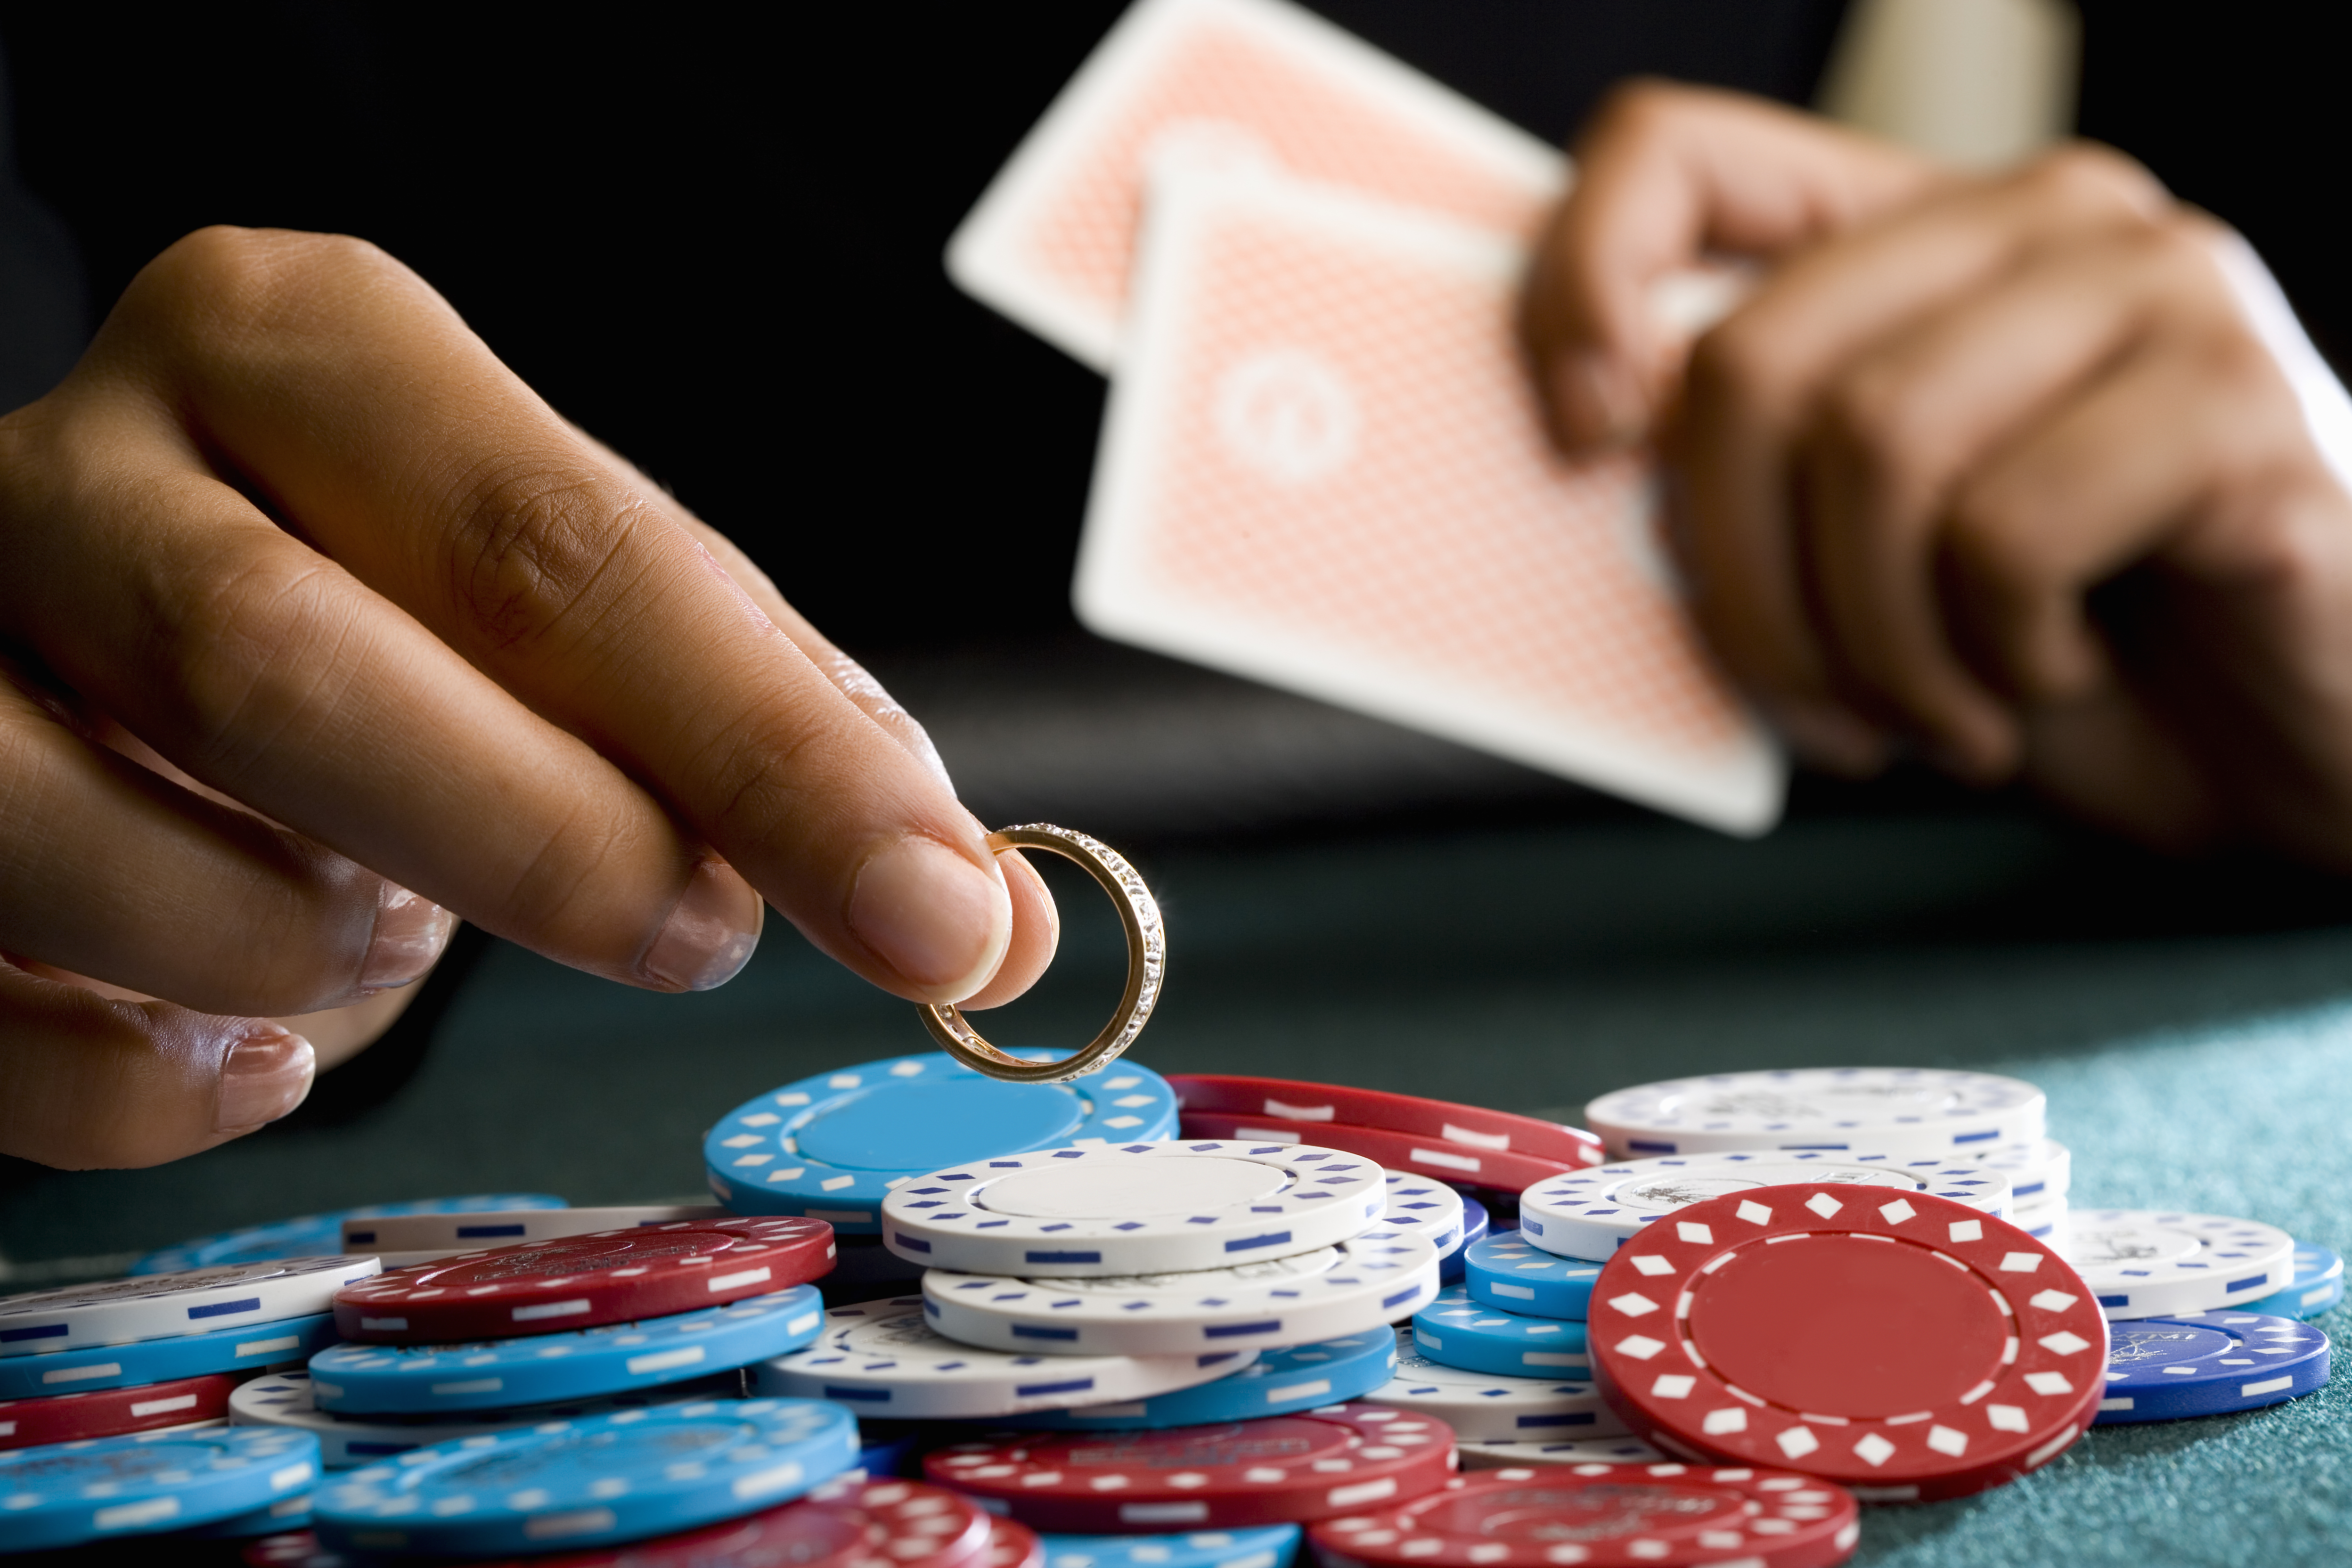 How Gambling Affects Families And Where To Get Help